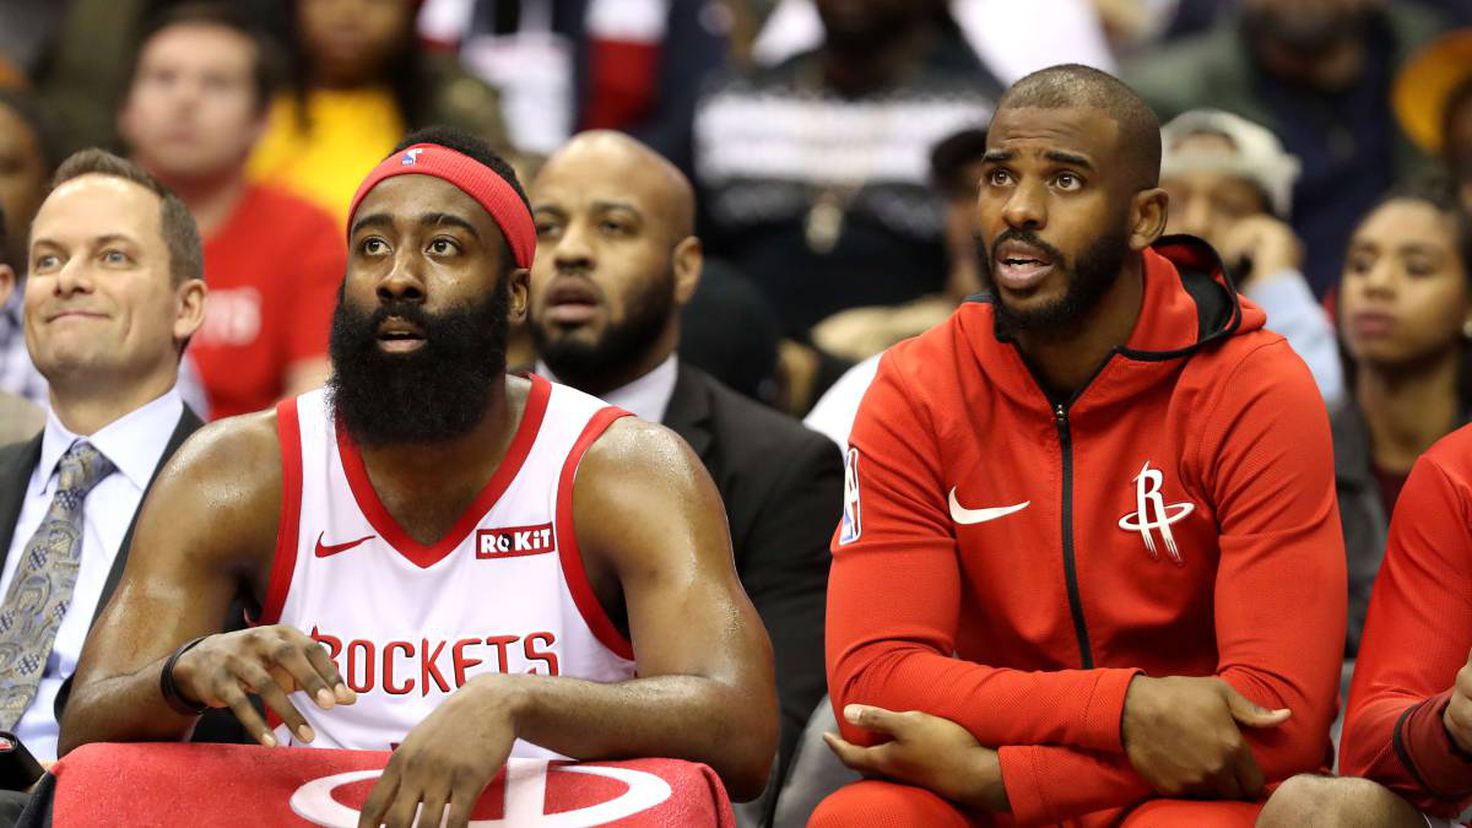 The NBA has started to move: Paul continues, Harden leaves
